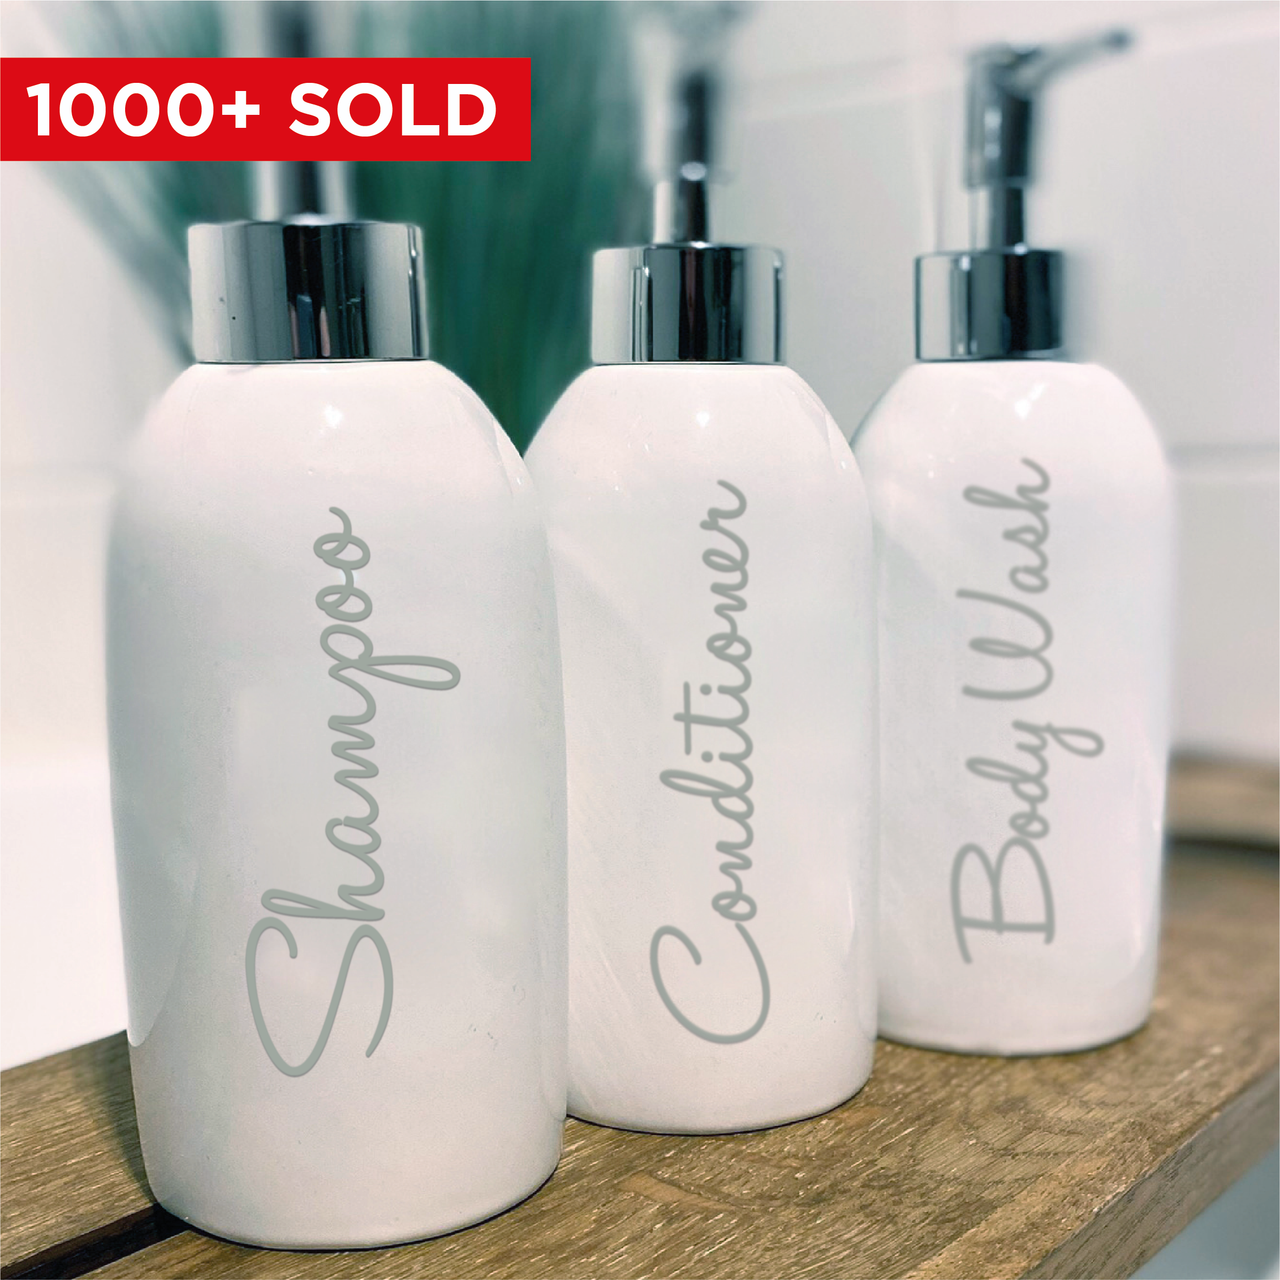 SHAMPOO, CONDITIONER AND BODY WASH - Mrs Hinch inspired bottle decal stickers